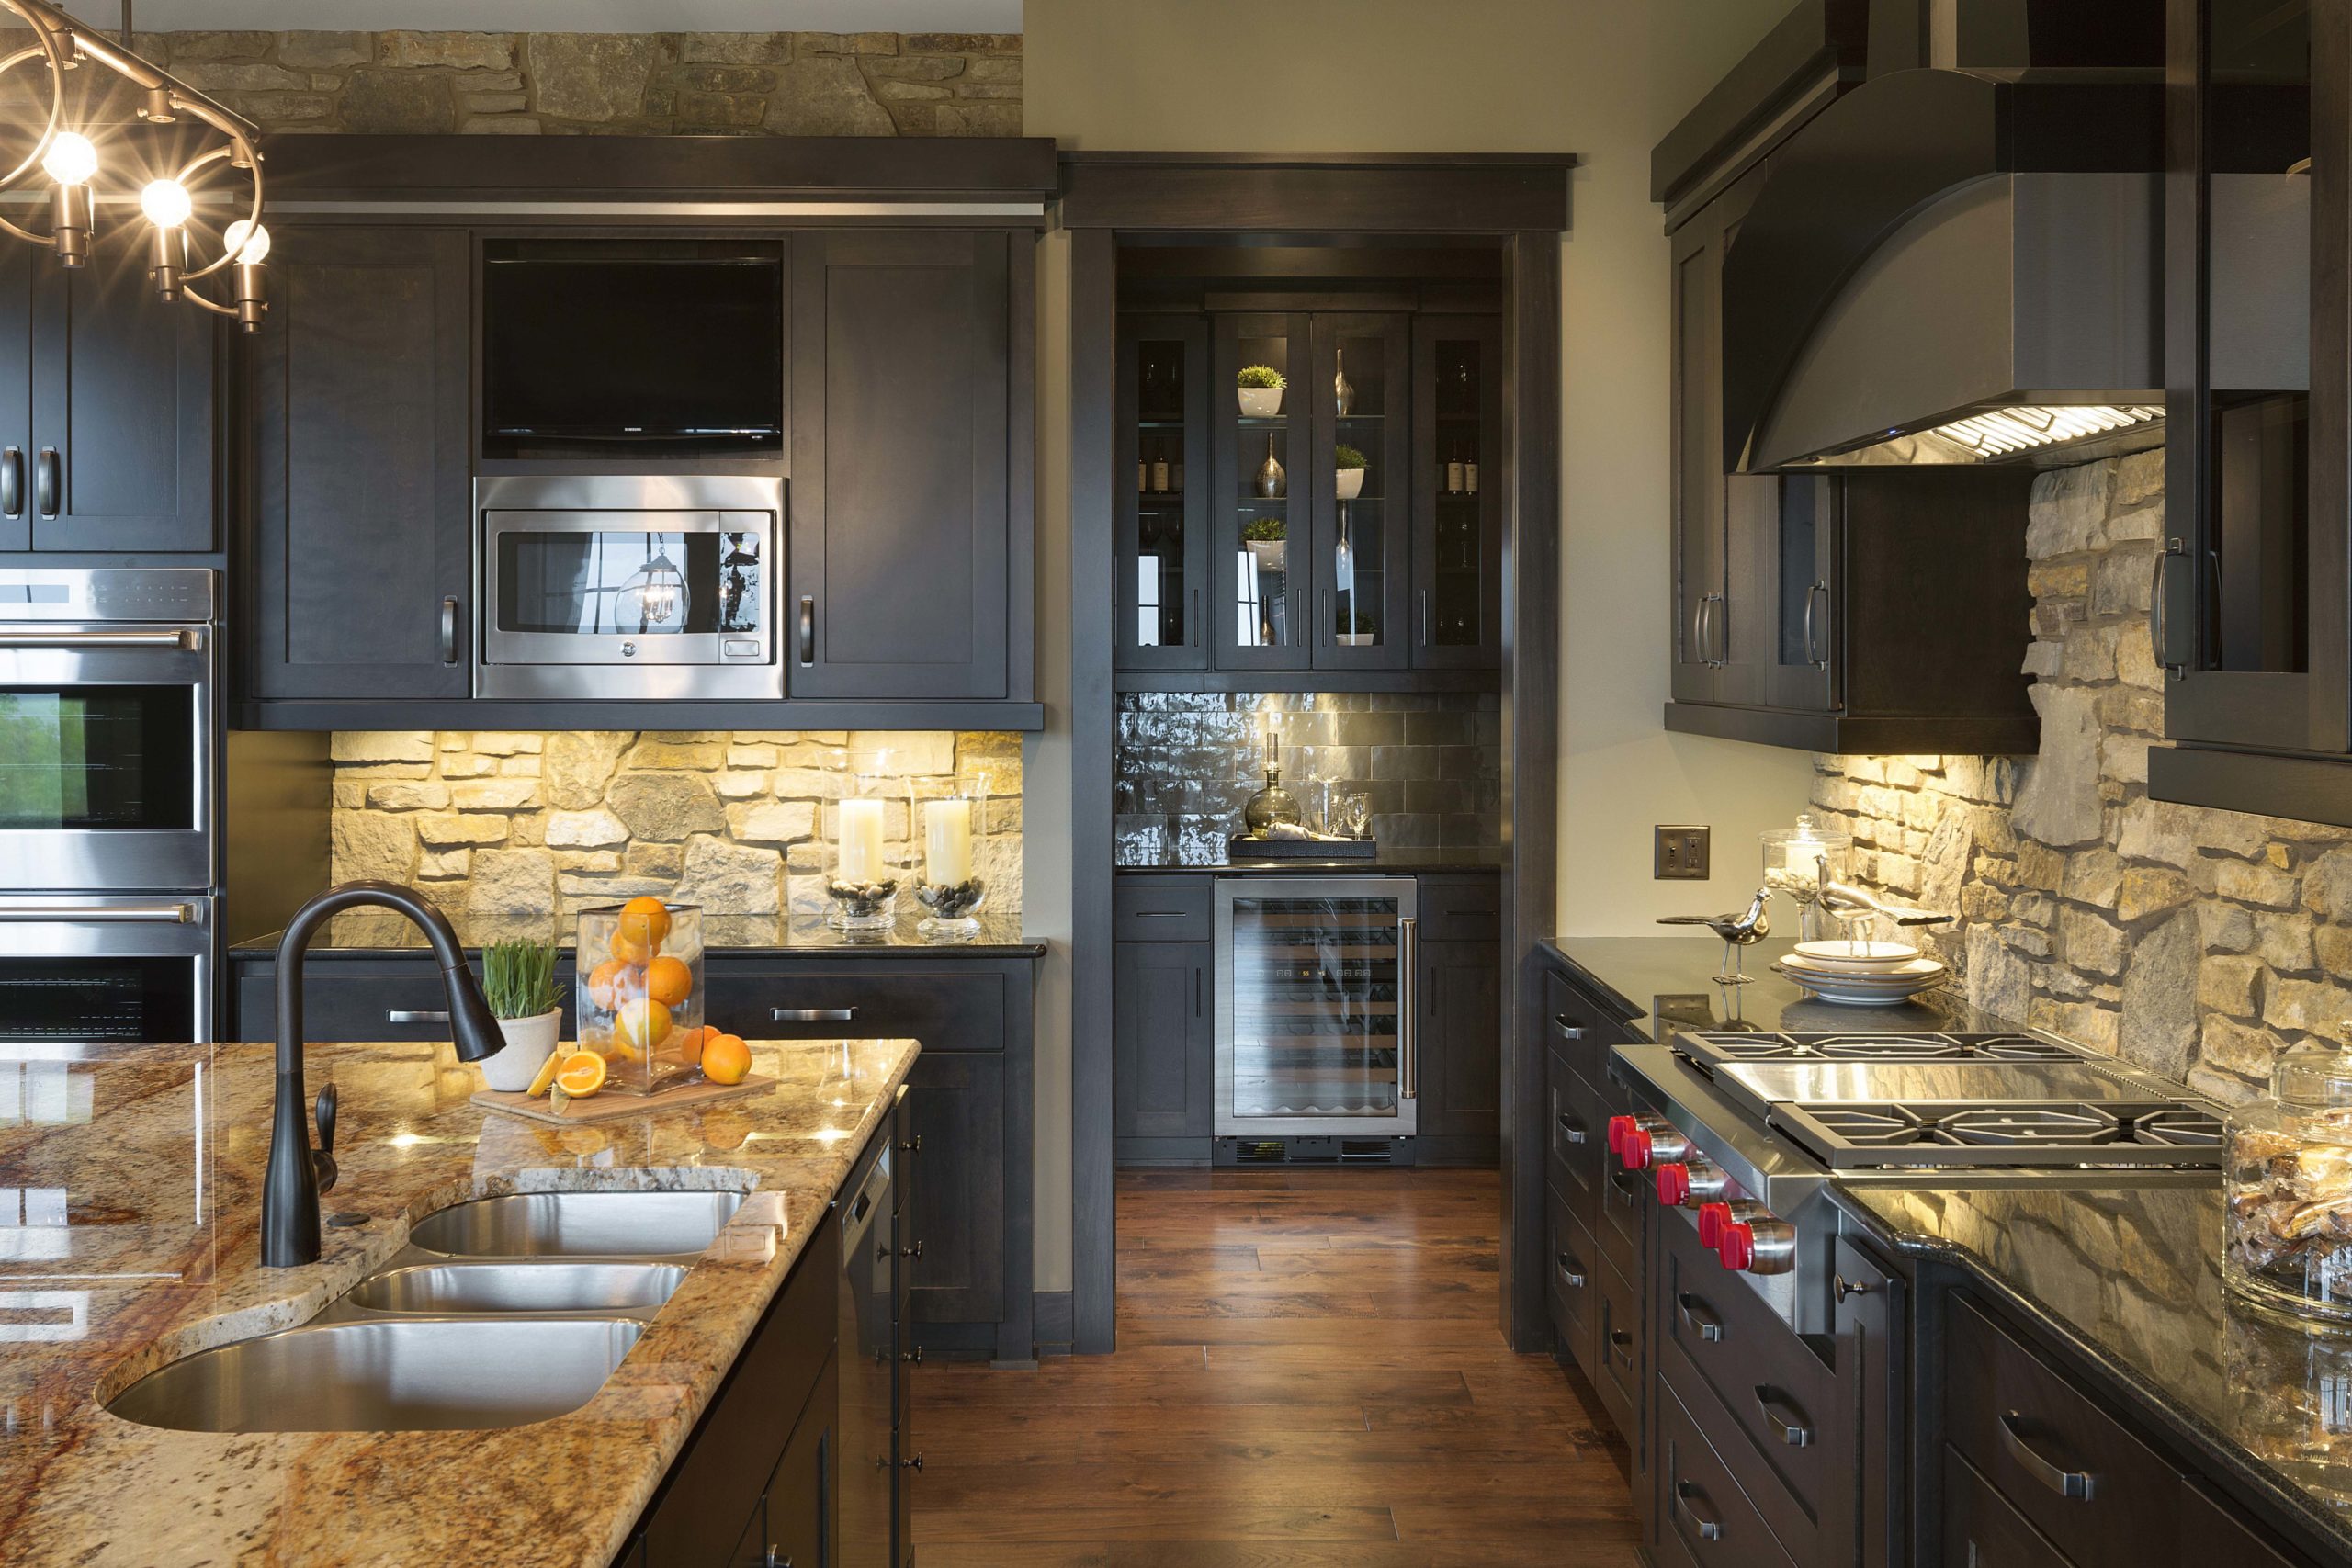 A kitchen with black cabinets and granite counter tops.